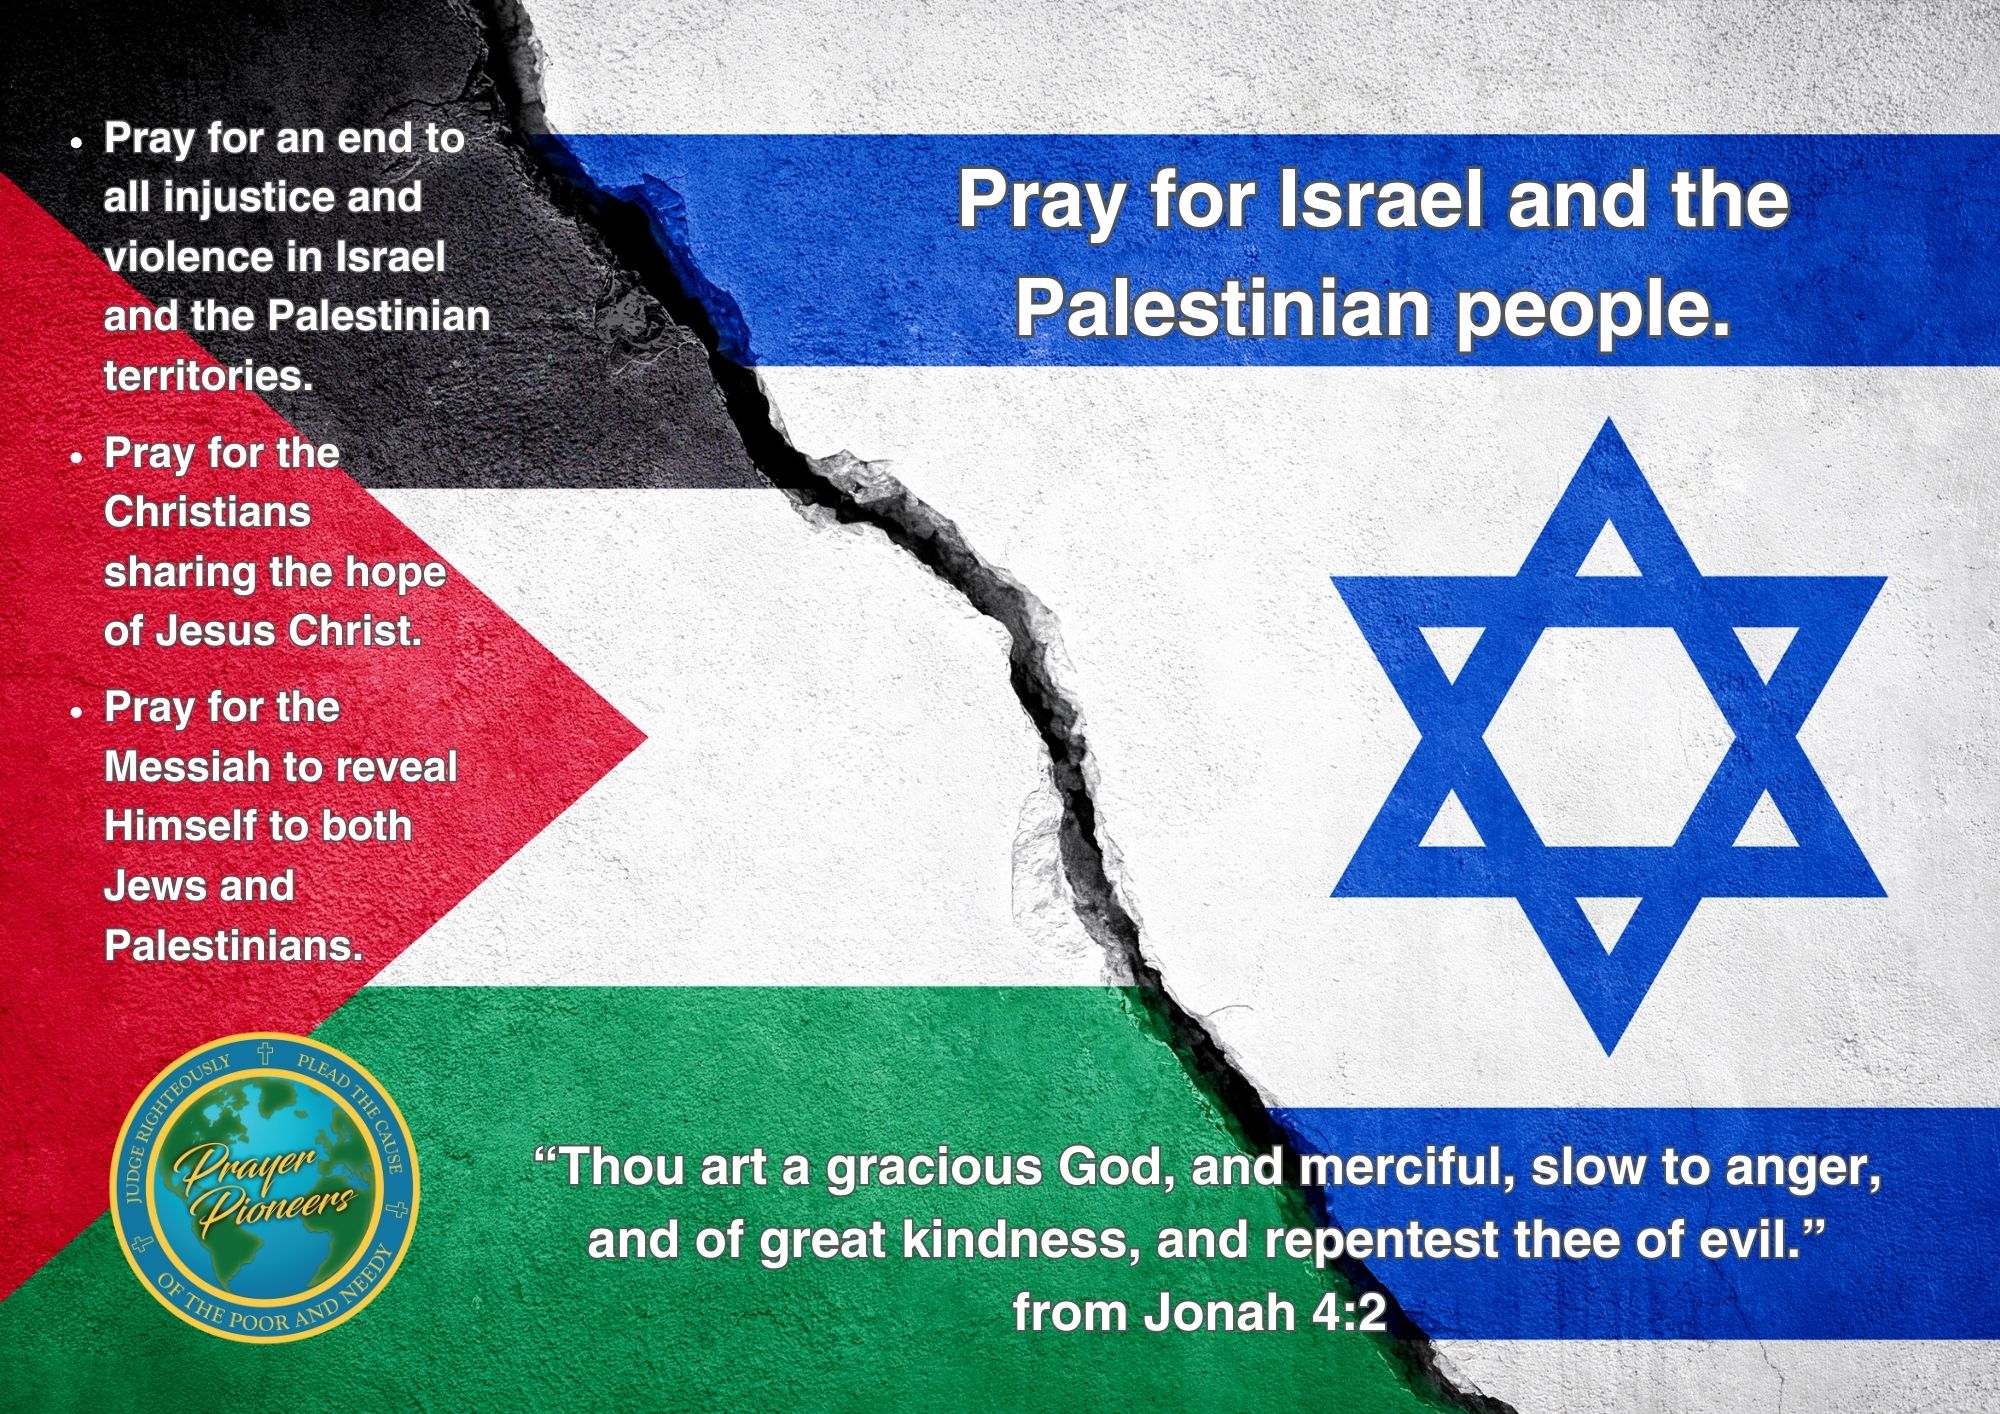 Pray for Israel and the Palestinian people.